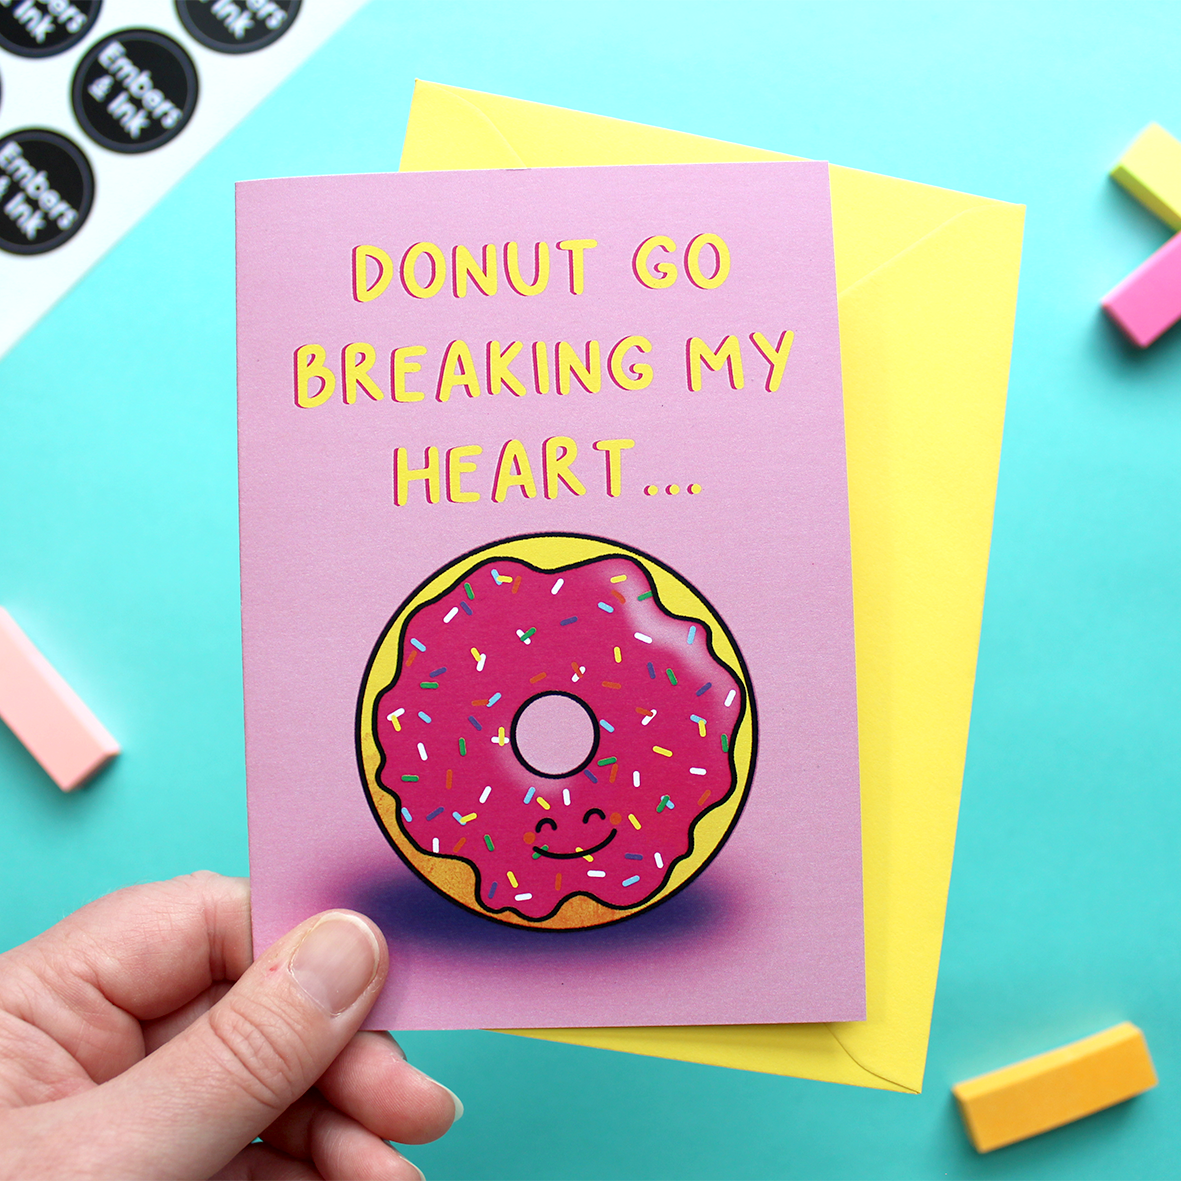 A hand holds a card that shows an illustration of a smiling iced donut, underneath the words 'donut go breaking my heart'. The background is pink.